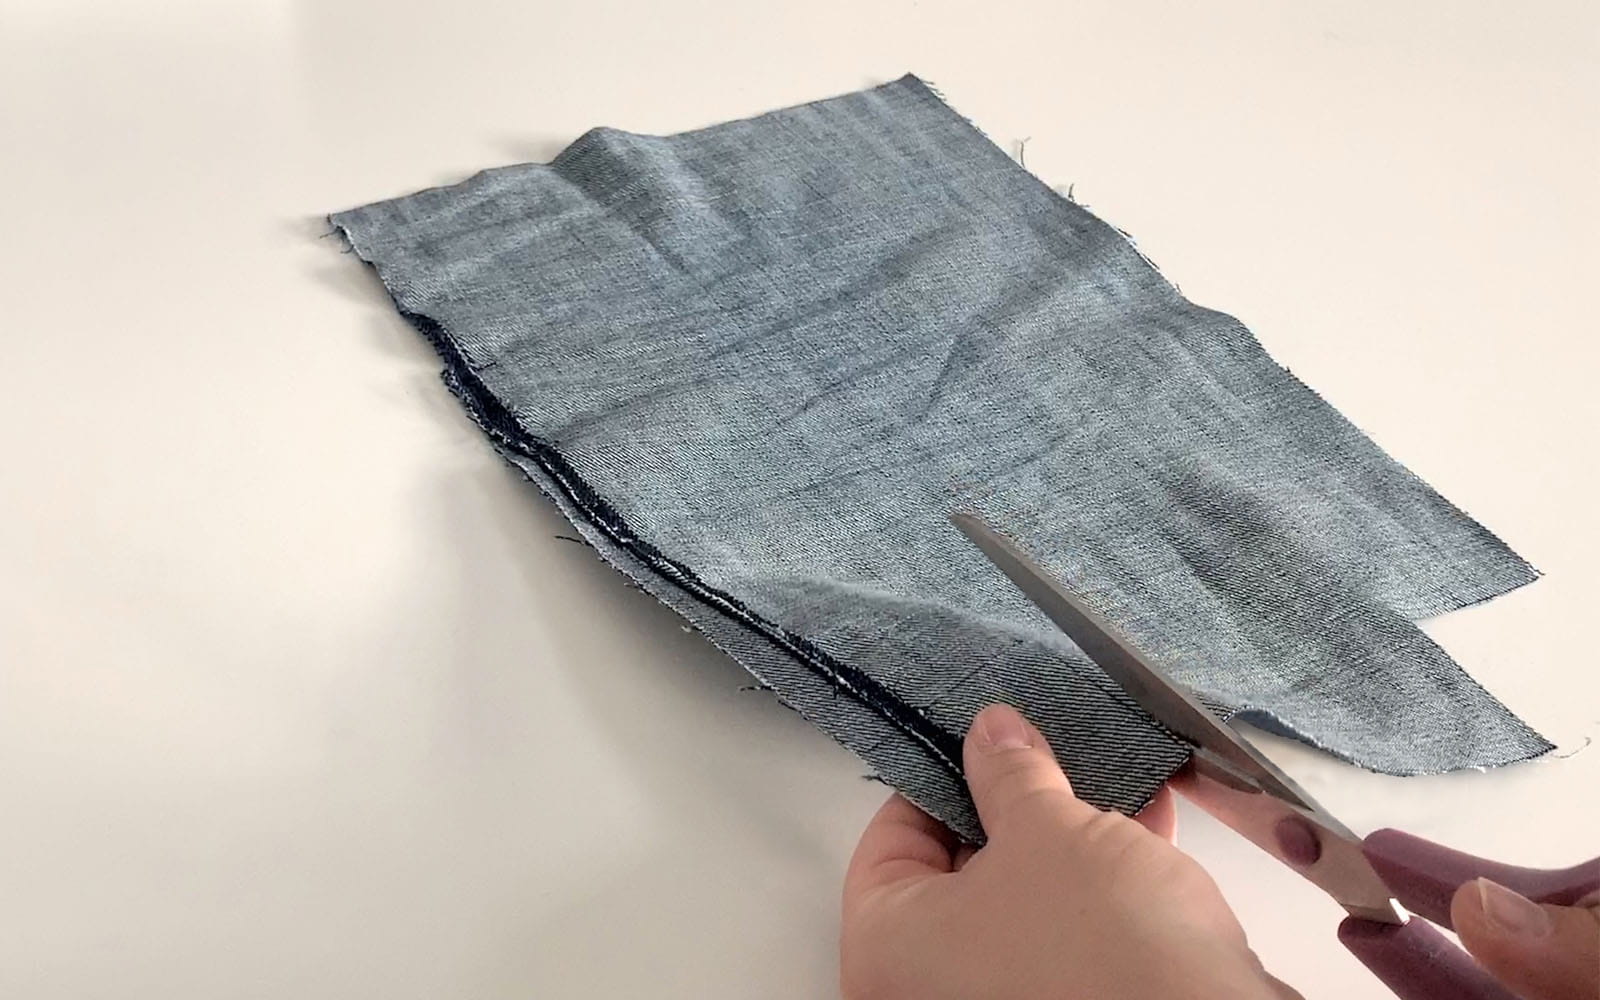 Hand holding scissors cutting small piece out of denim